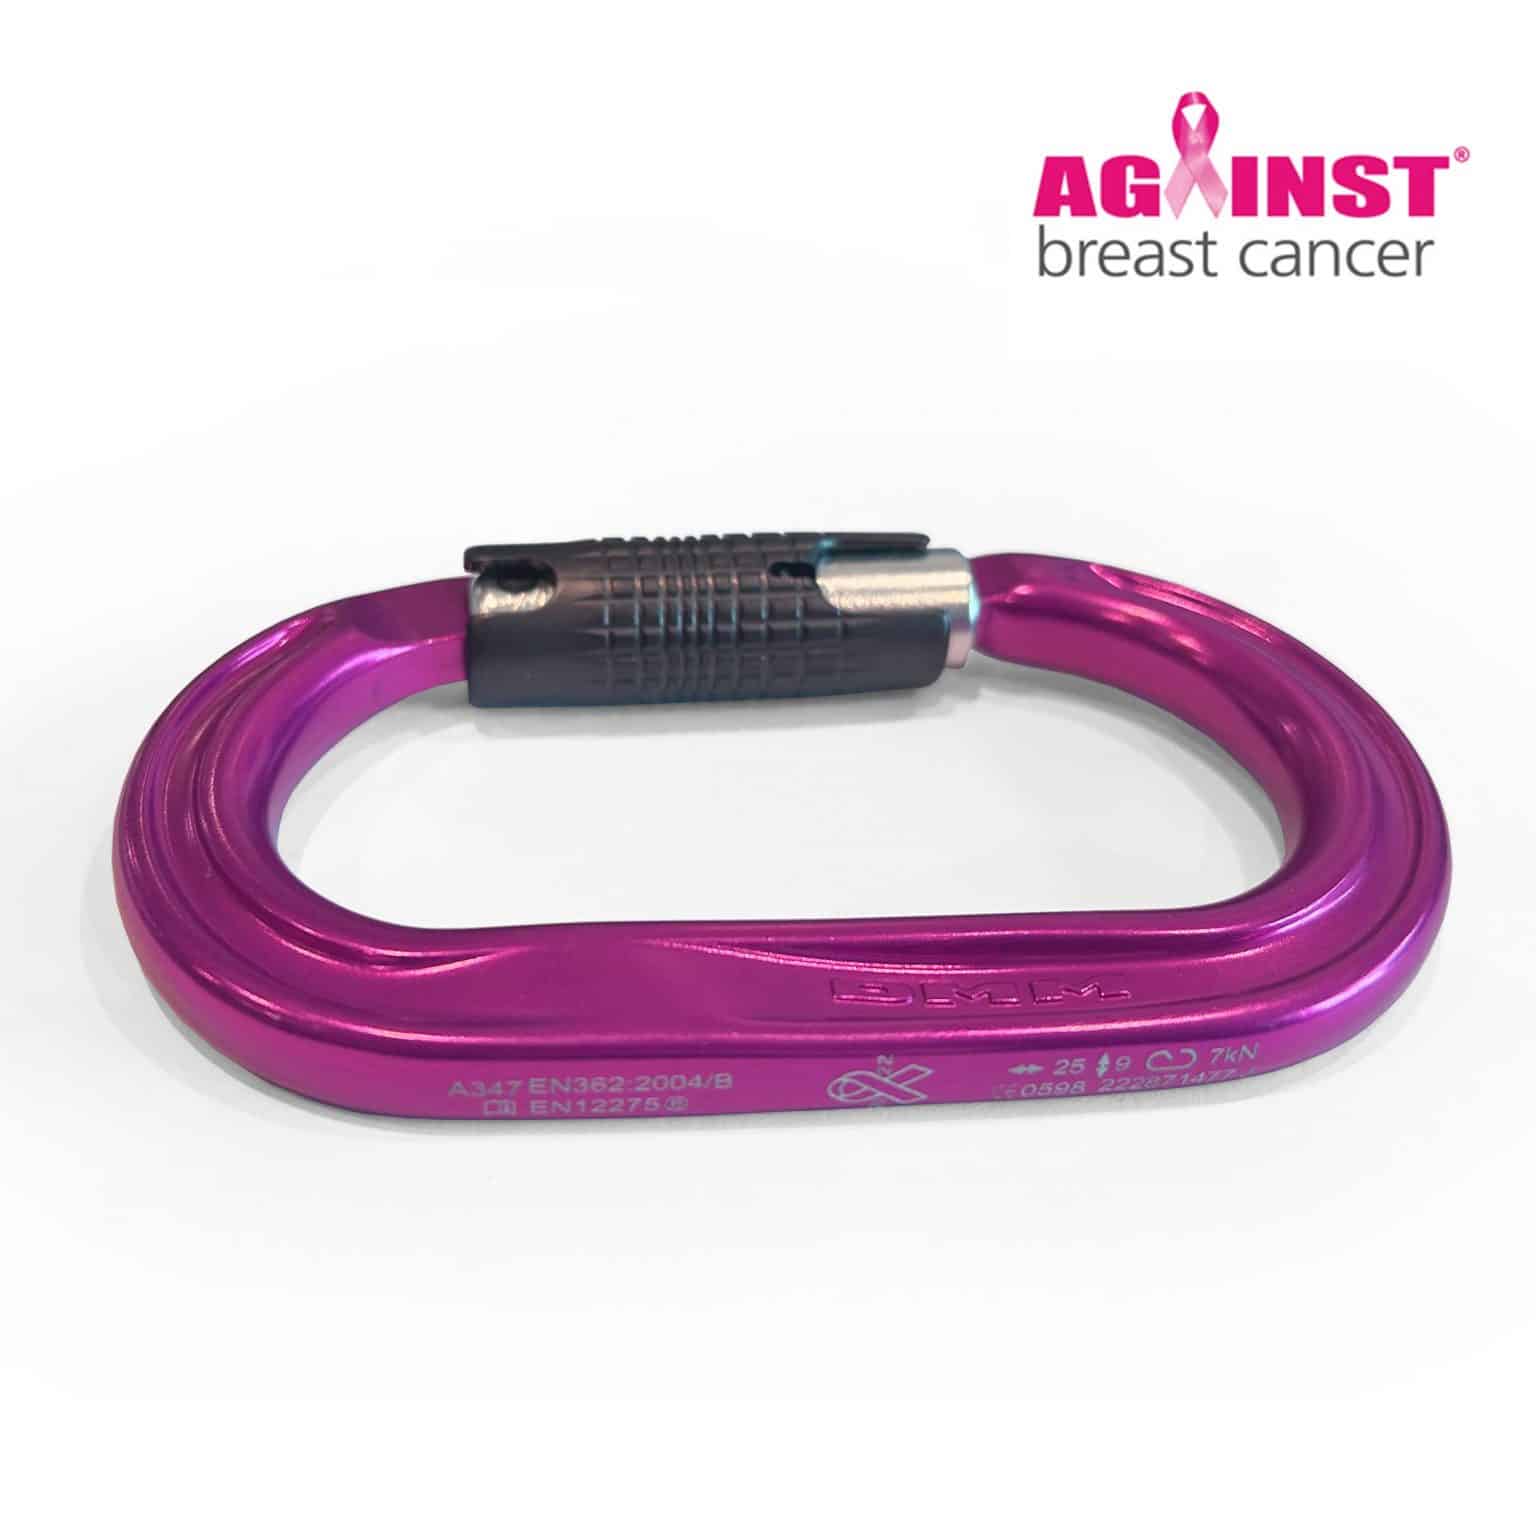 DMM AmericanO Limited Edition Pink Carabiner